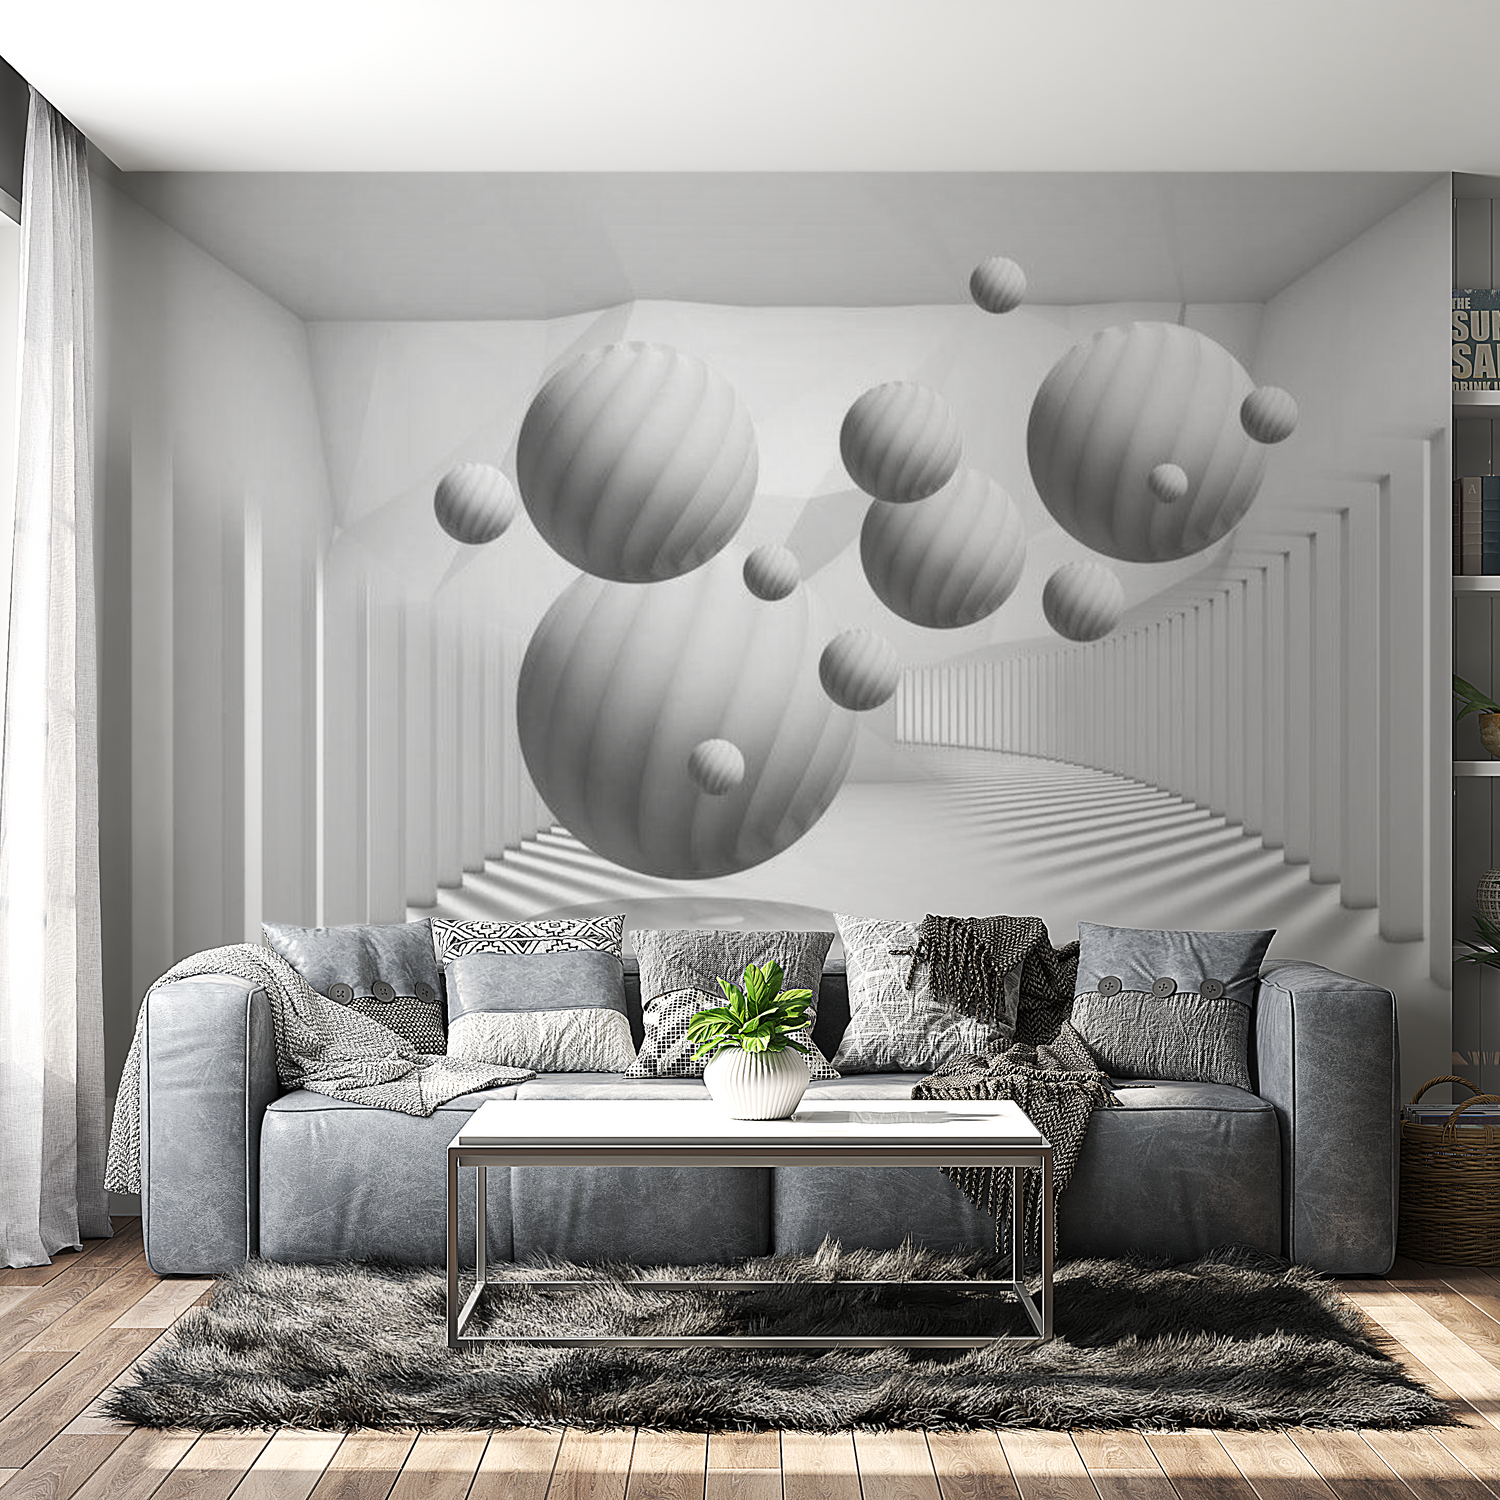 3D Illusion Wallpaper Wall Mural - Balls In White 39"Wx27"H